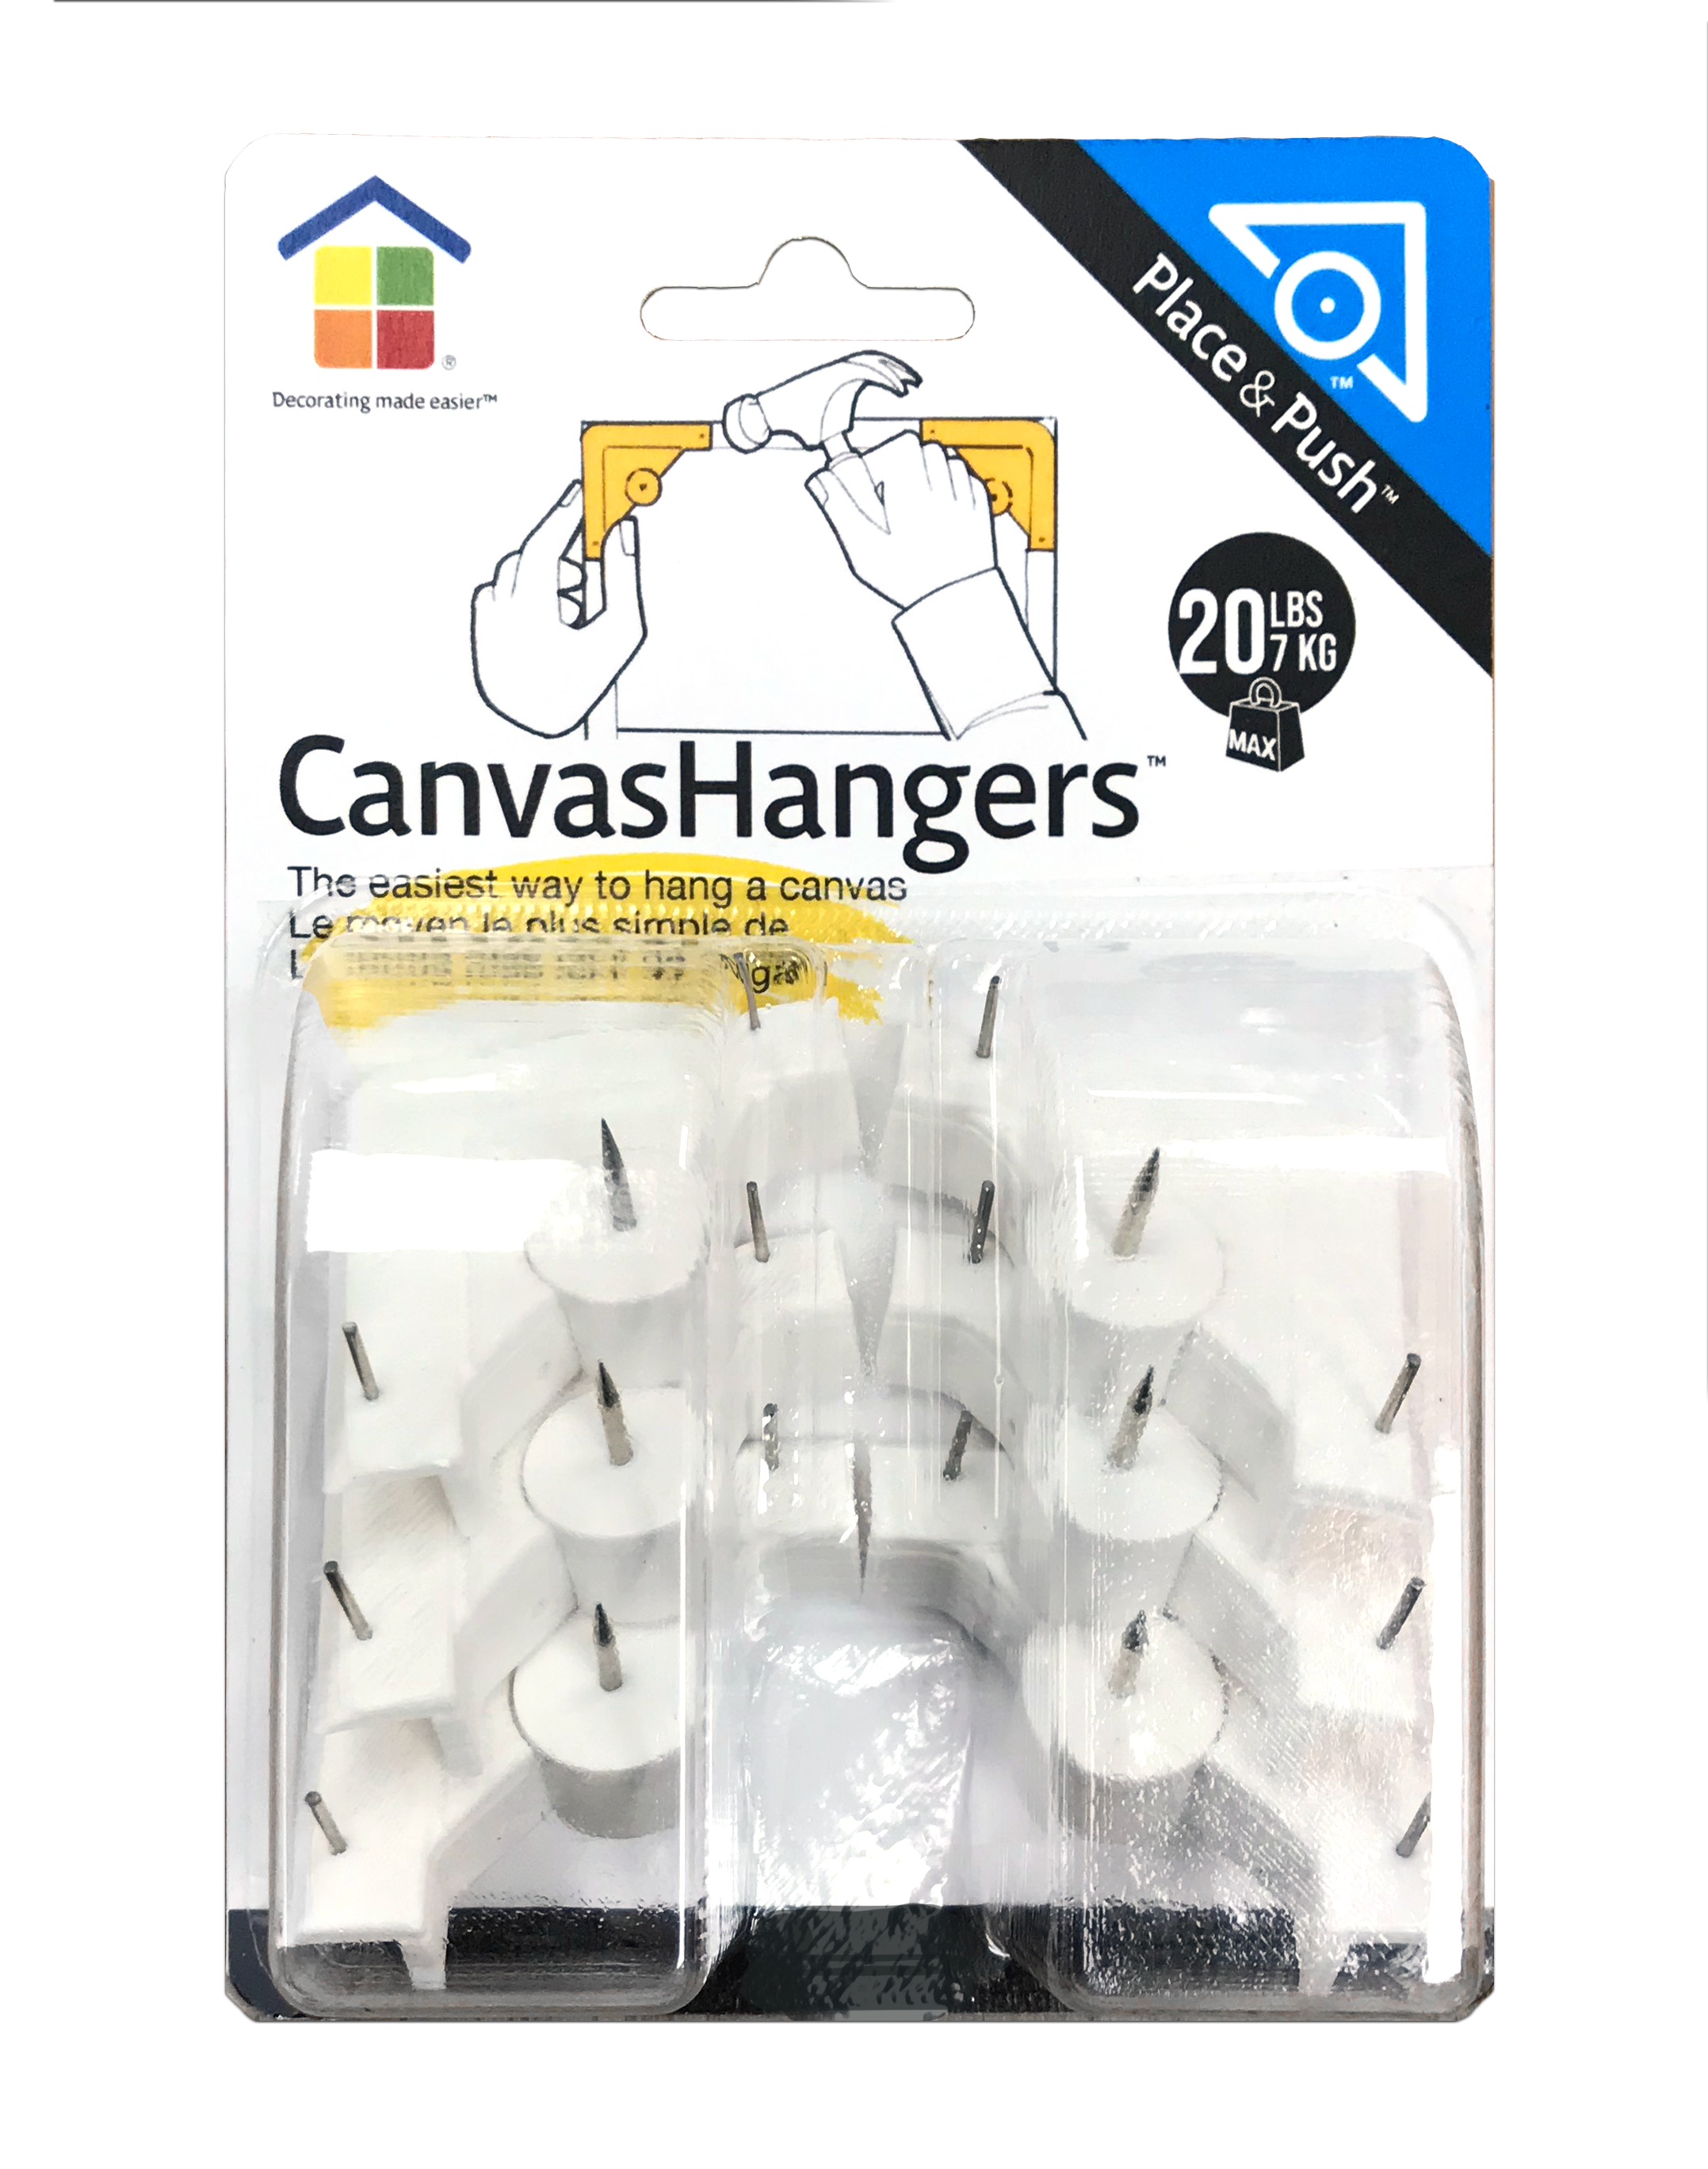 13 AMAZING WAYS TO CREATE CRAFTS WITH PLASTIC HANGERS – Only Hangers Inc.